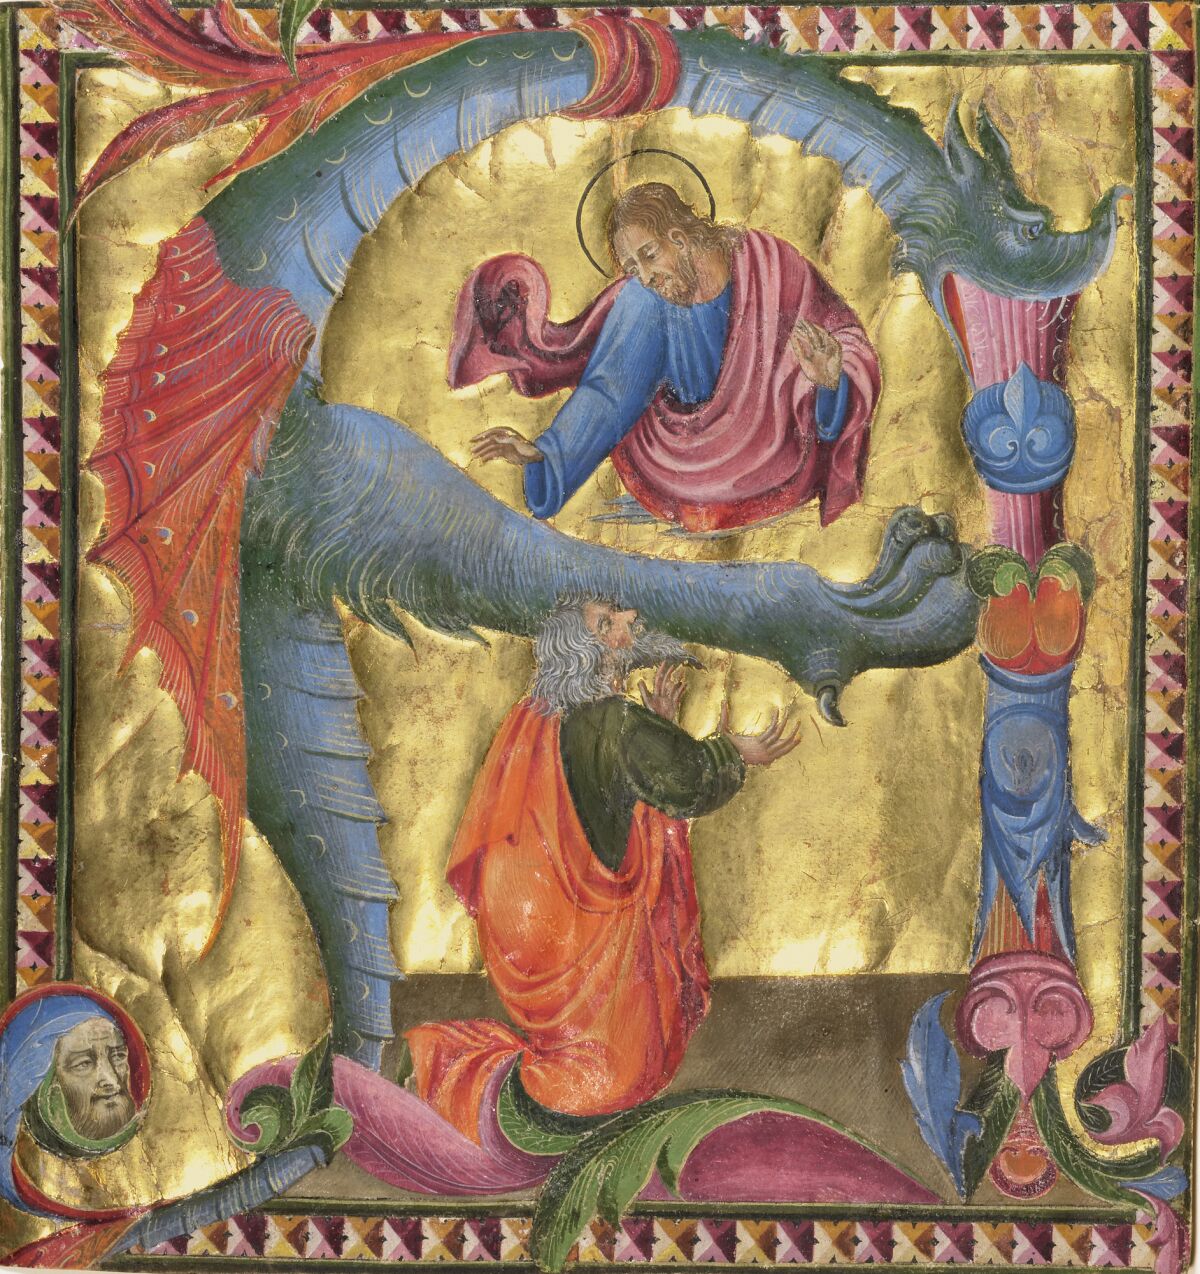 "Initial A: Christ Appearing to David" by Giovanni di Paolo, about 1440, tempera colors, gold leaf and ink on parchment. (J. Paul Getty Museum)